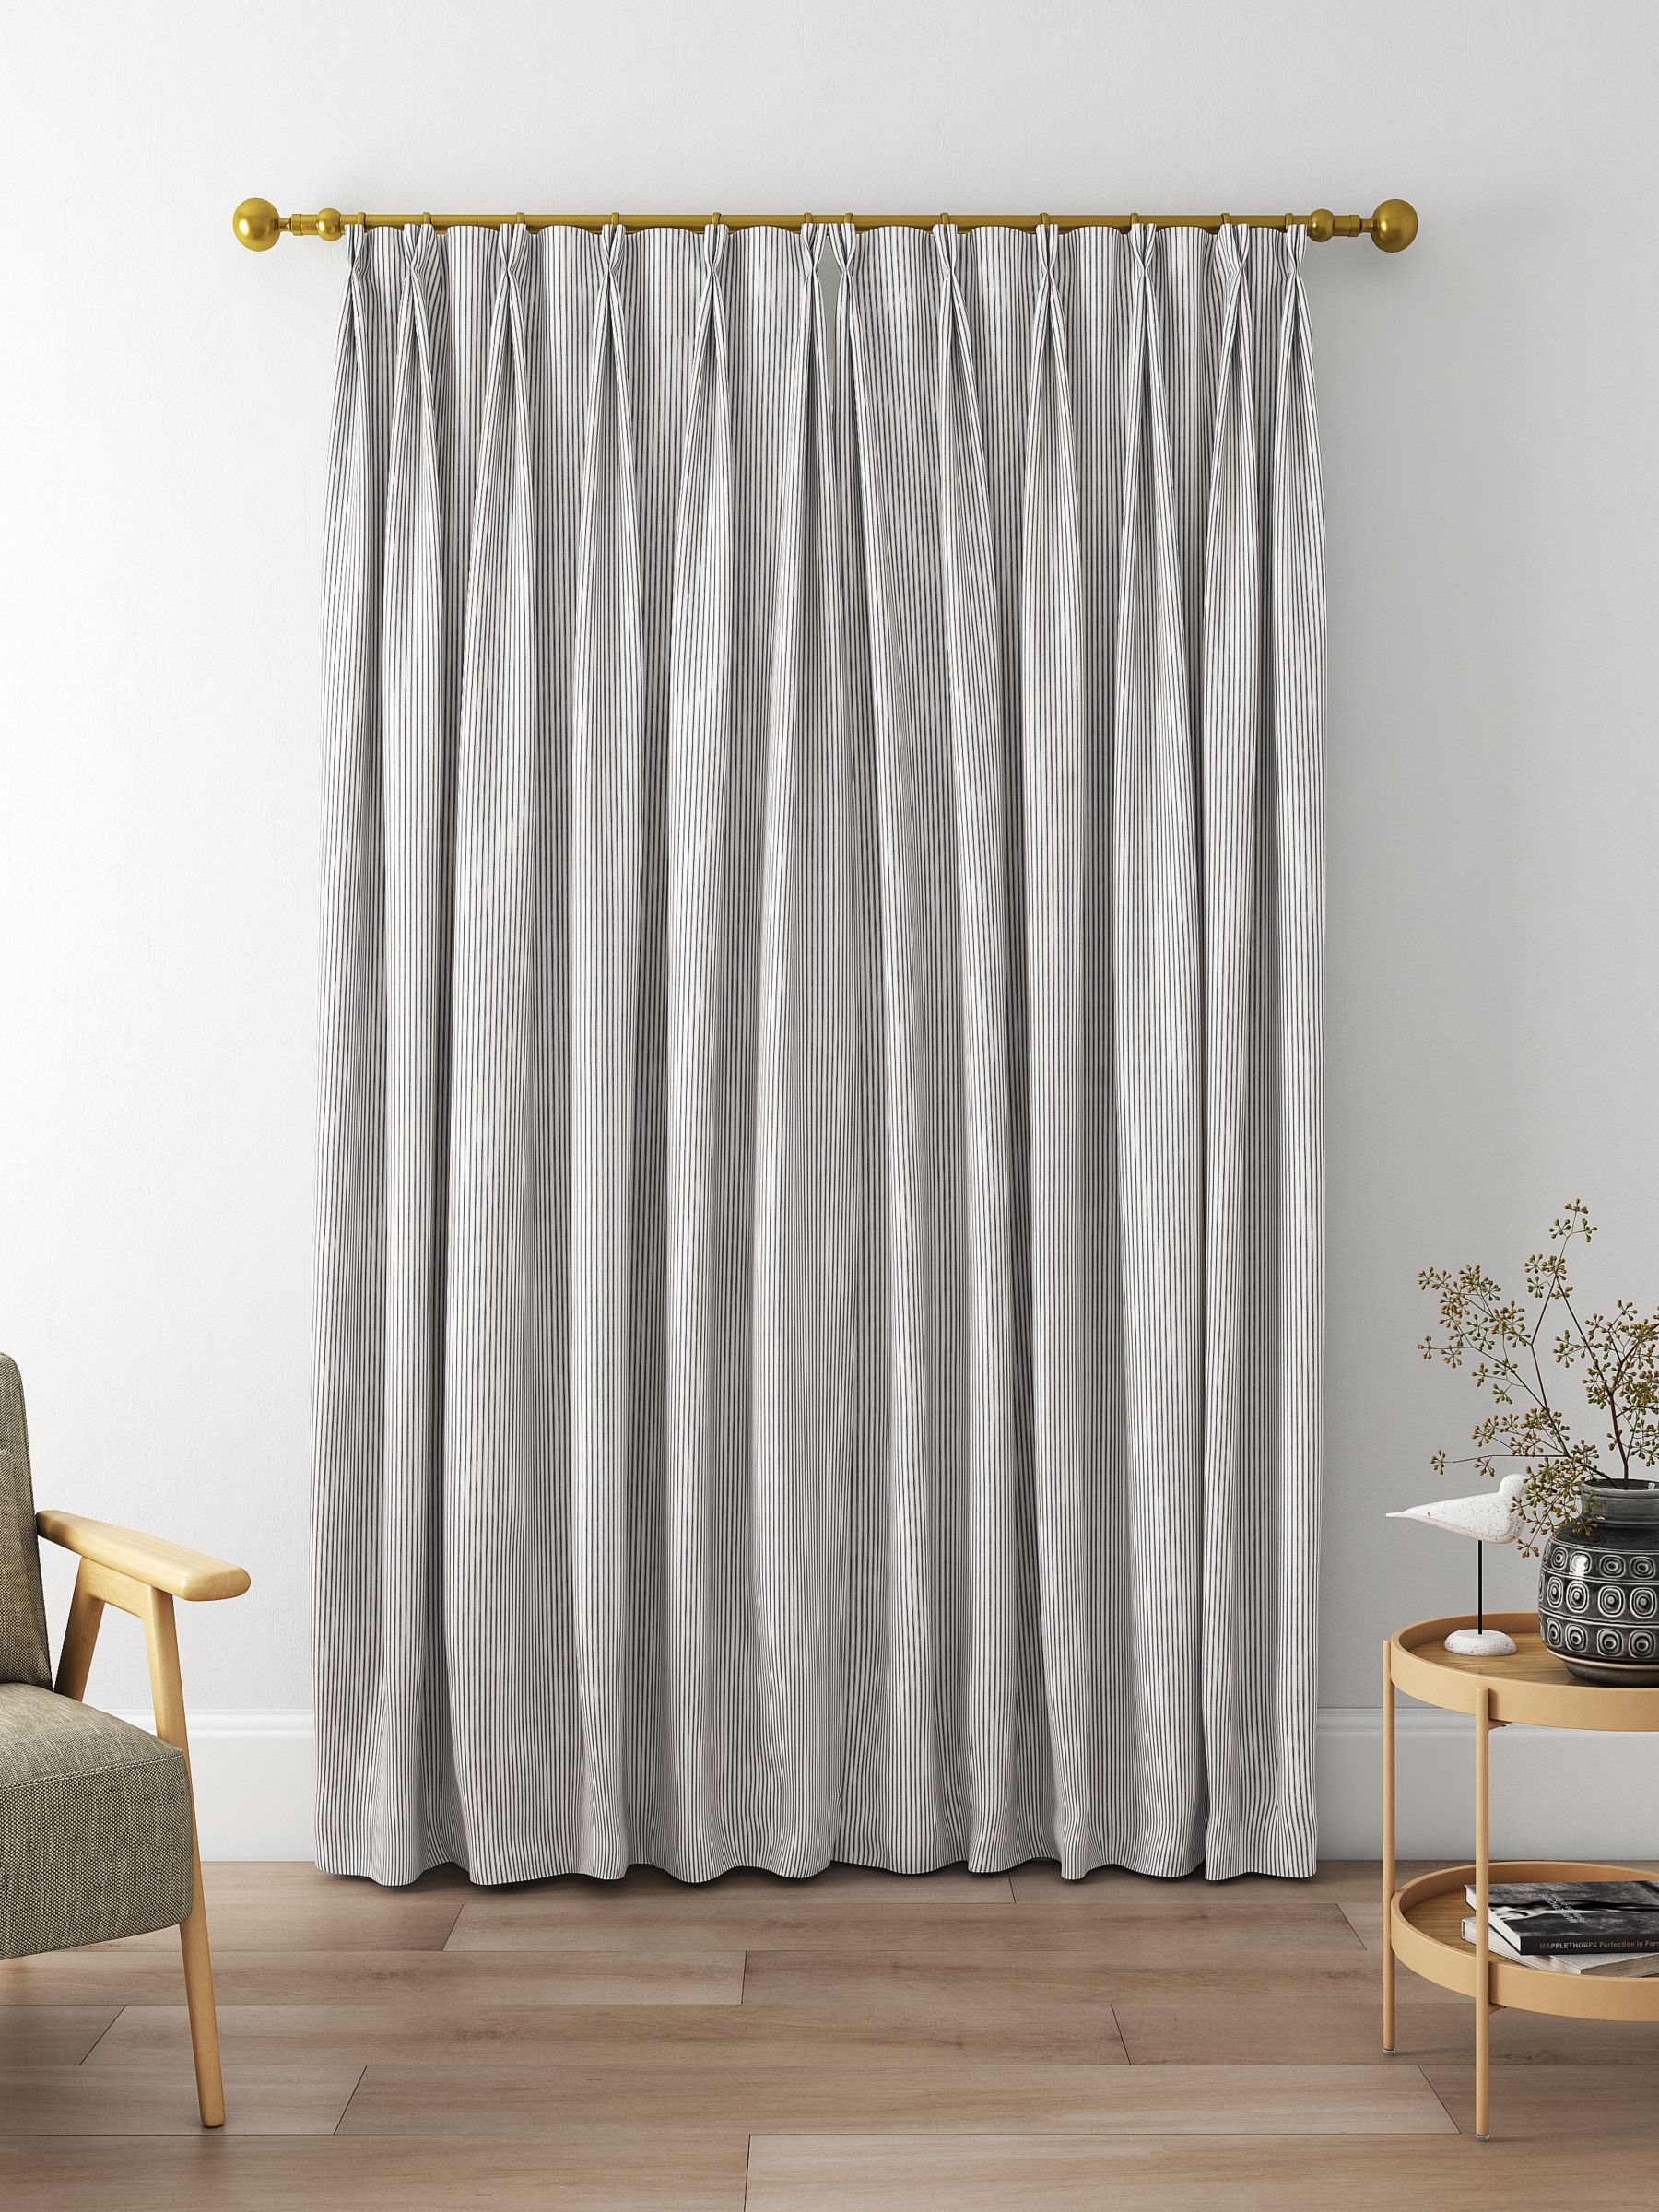 Clarke & Clarke Sutton Made to Measure Curtains, Charcoal